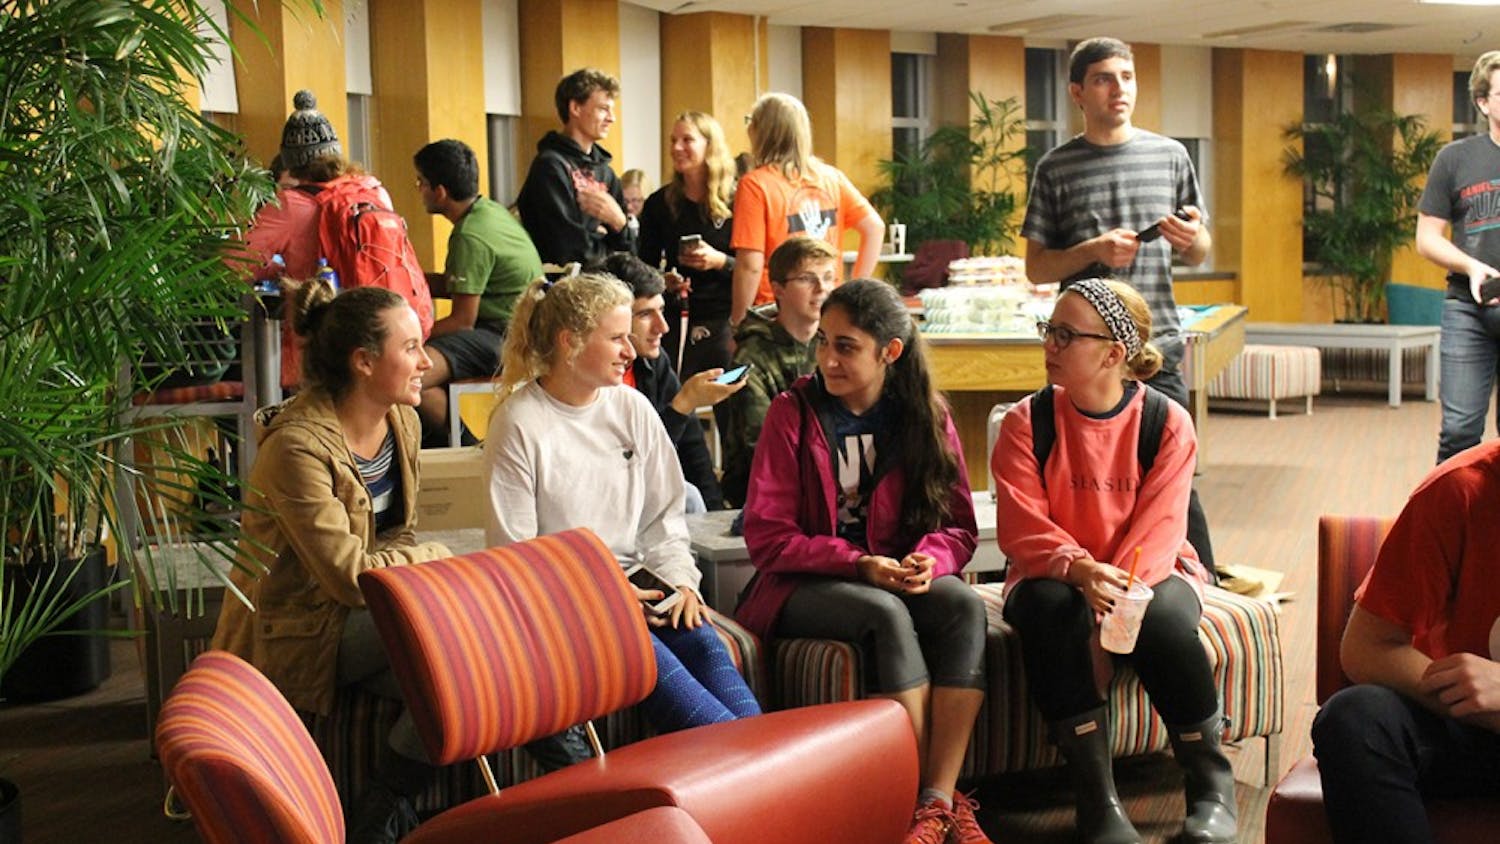 Students talk during an election watch party. Forest Honors Council, part of the Hutton Honors Council Association, provides patriotic cookies and cupcakes to anyone that attended the election night viewing party in the Forest Quad building's Treehouse on Tuesday night.